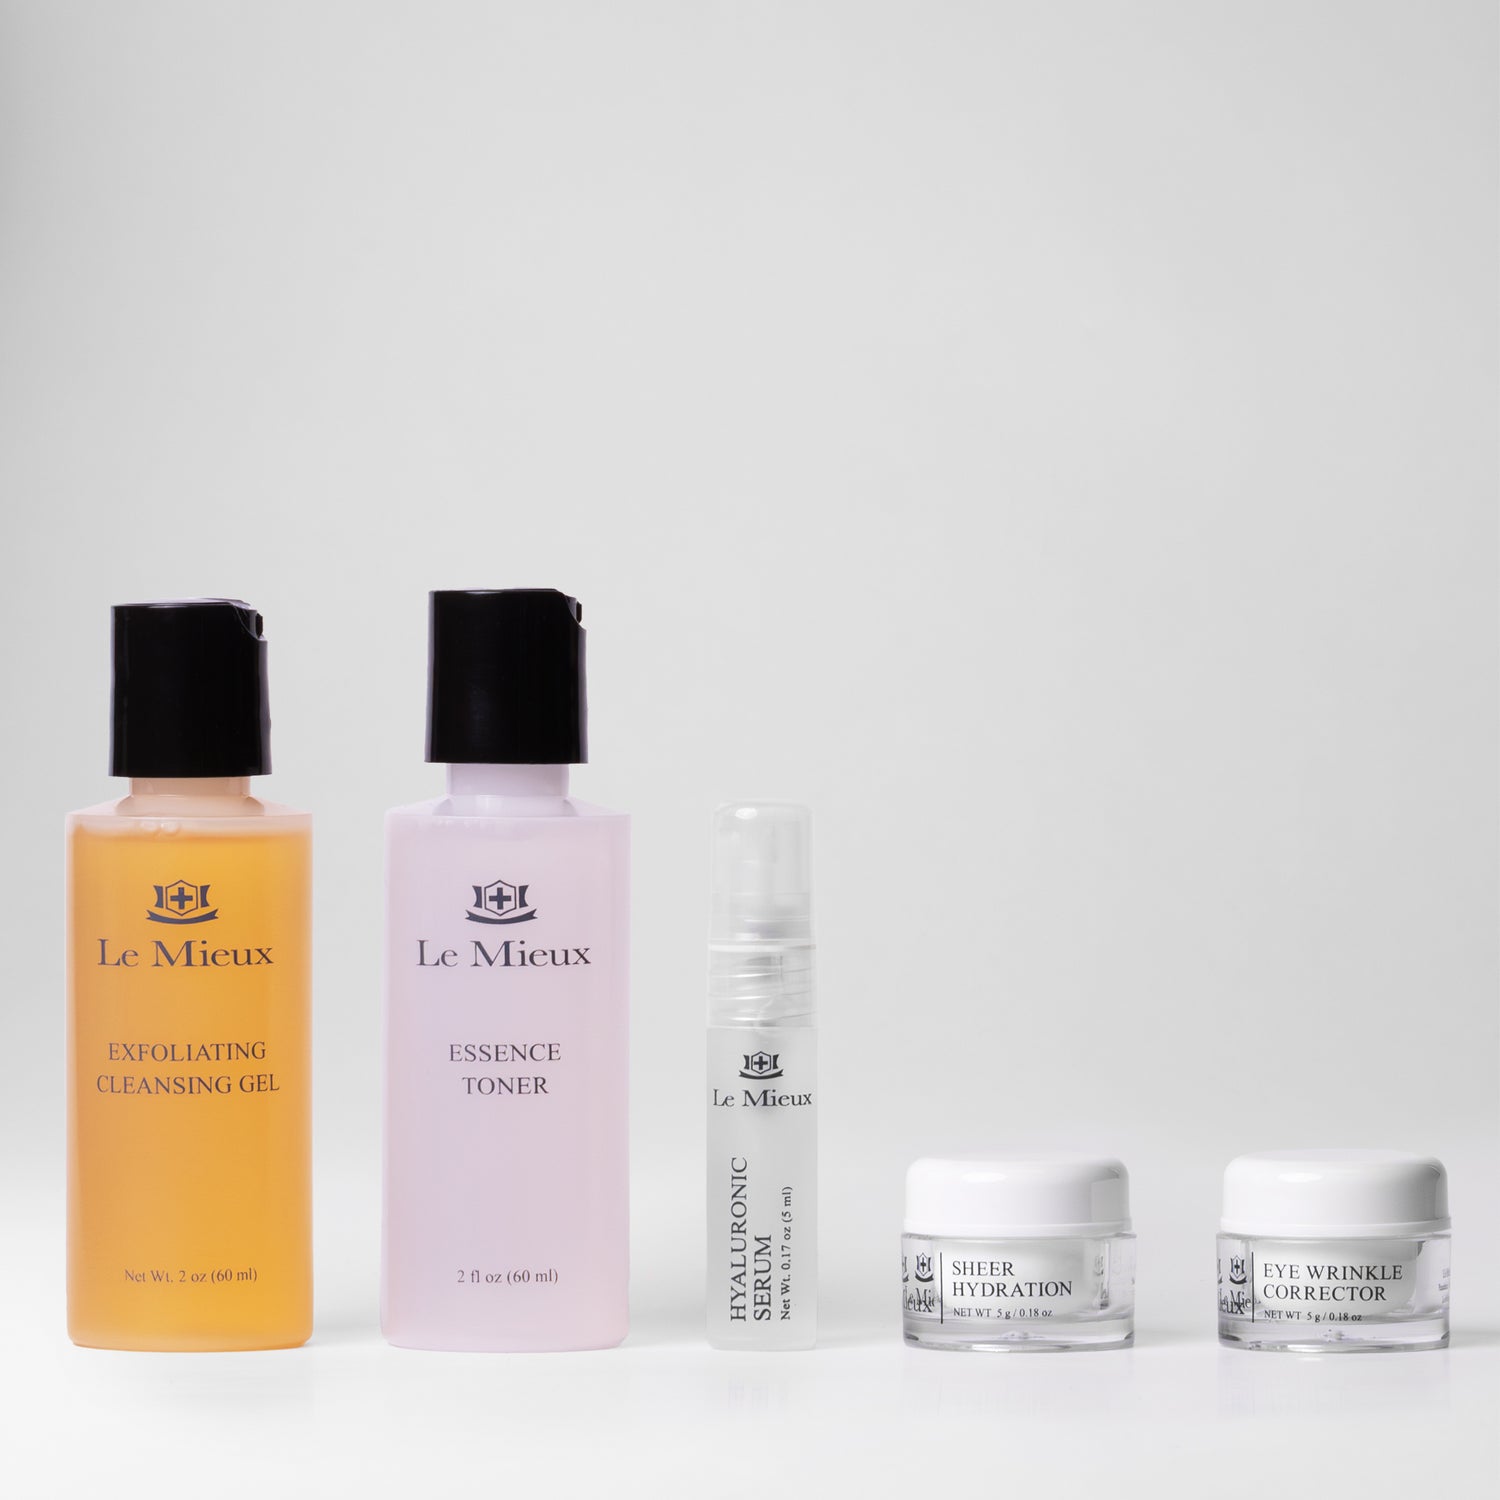  CLEAR SKIN BEAUTY ESSENTIALS from Le Mieux Skincare - 2